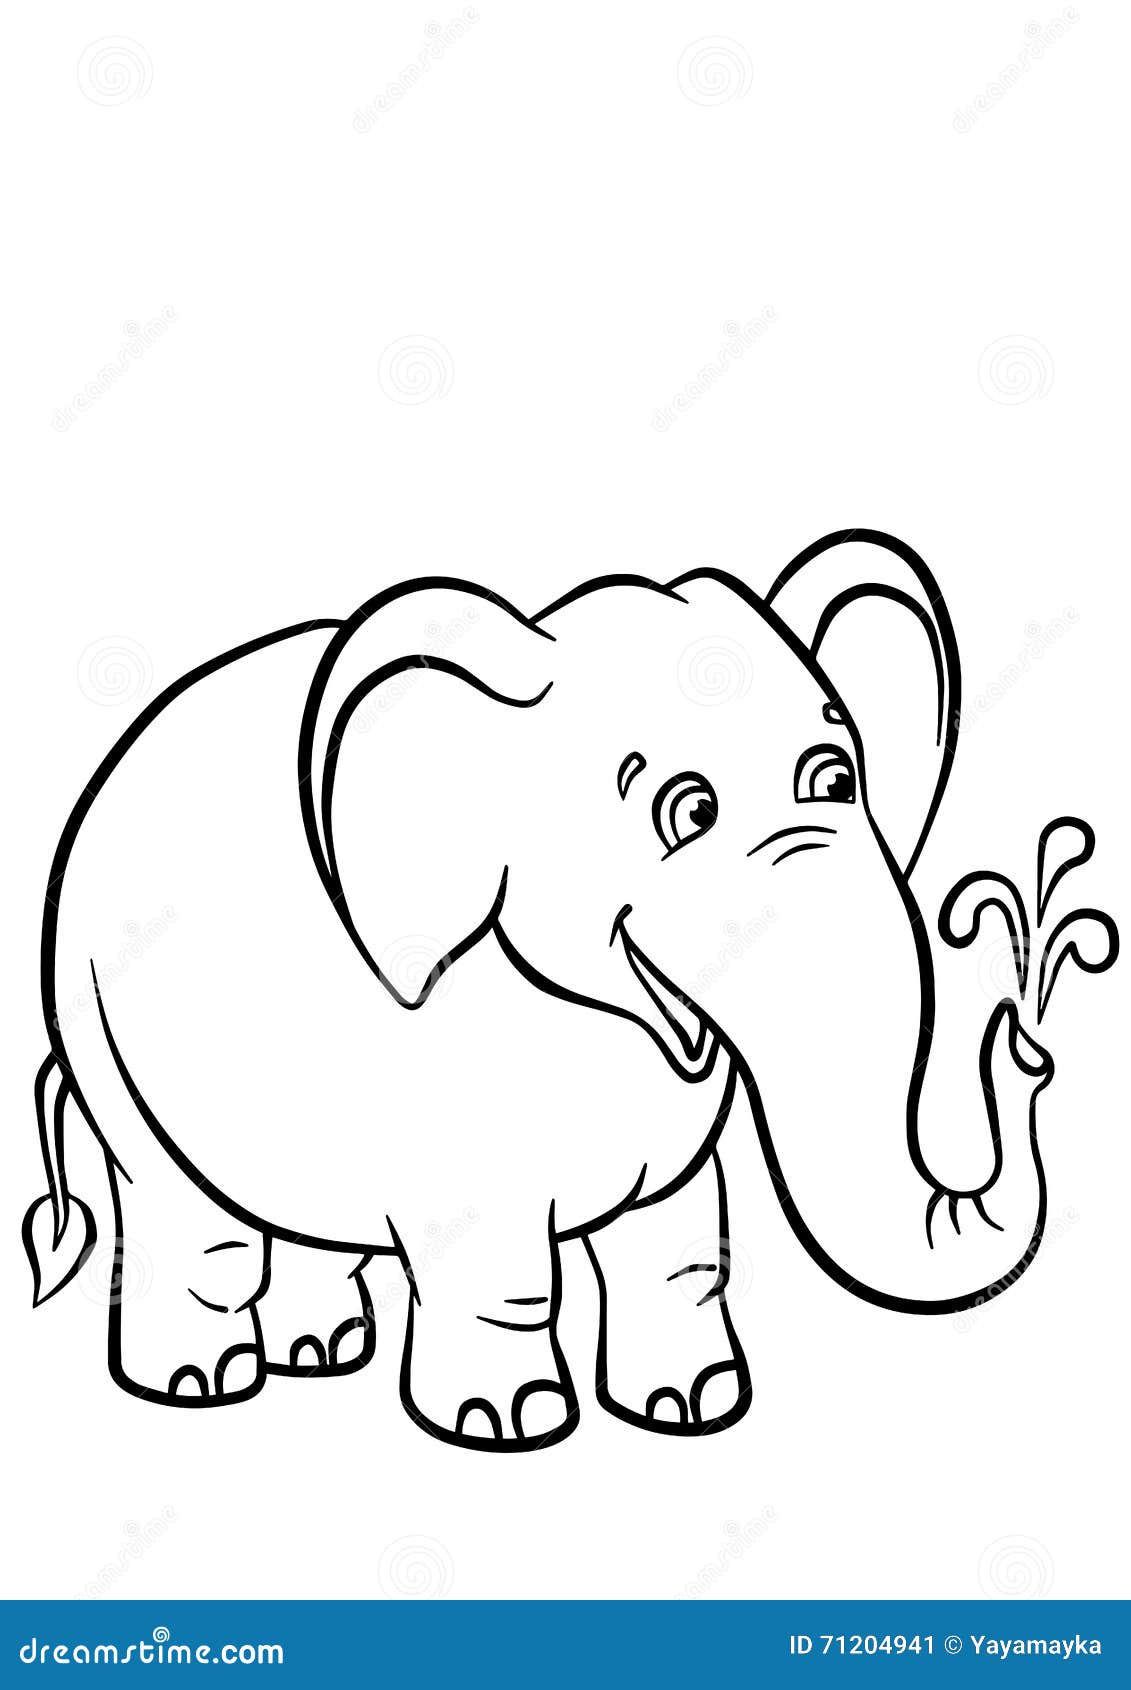 Coloring Pages. Animals. Cute Elephant. Stock Vector ...